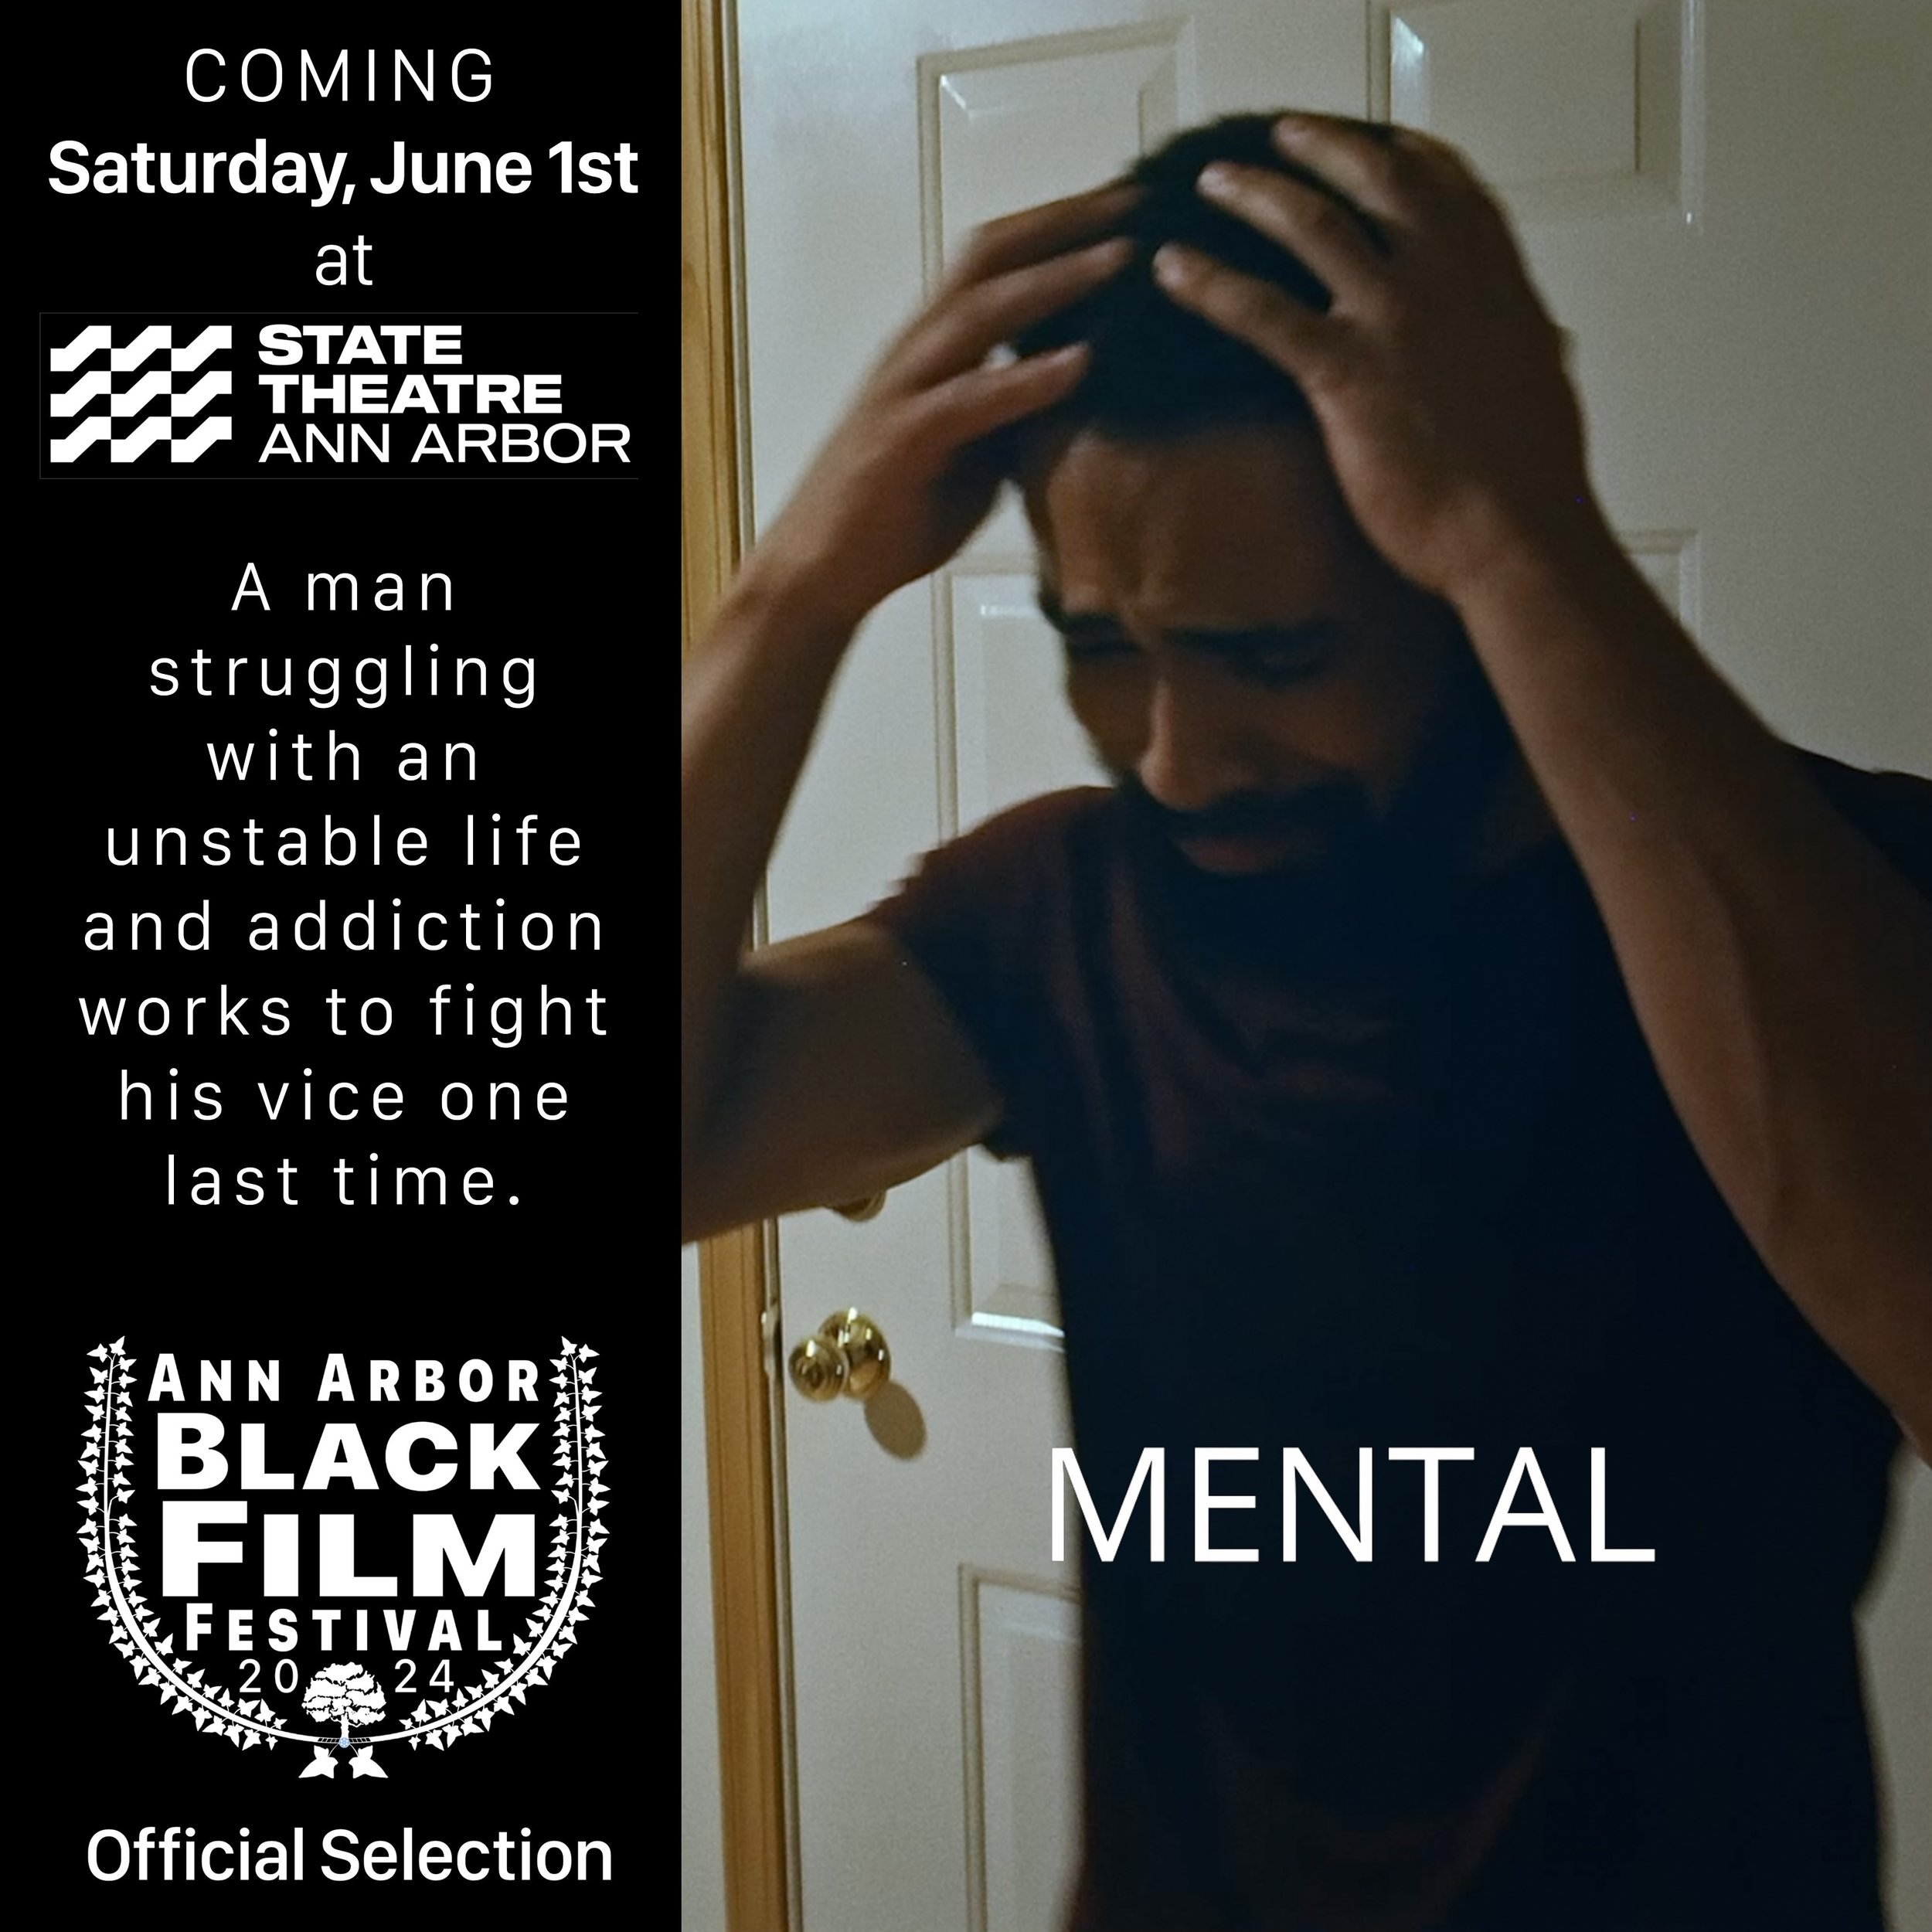 🎬✨ Get ready for an unforgettable experience at the Ann Arbor Black Film Festival, premiering Saturday, June 1st at the State Theater! 🌟
🎥 Featured Film: &ldquo;Mental&rdquo; by Amari Neal-Dodgen. Don&rsquo;t miss this exclusive ONE DAY ONLY scree